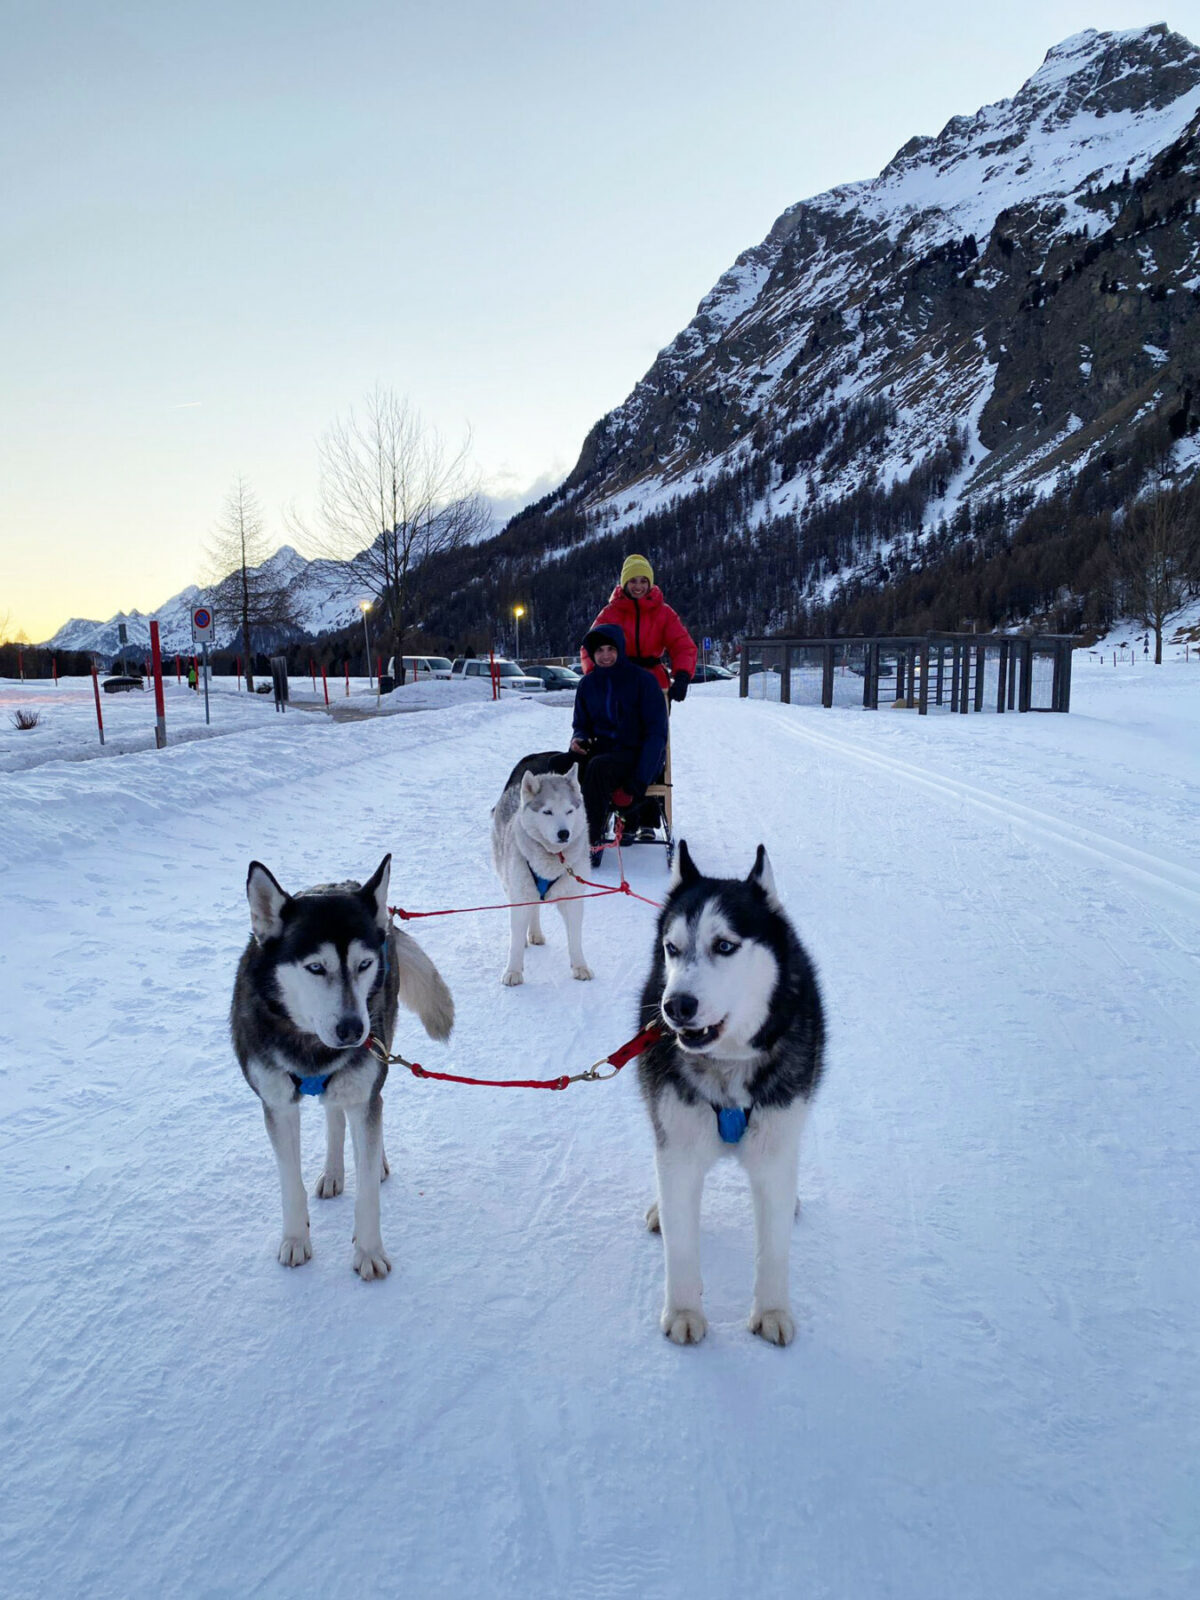 Couple on a sled pulled by three huskies